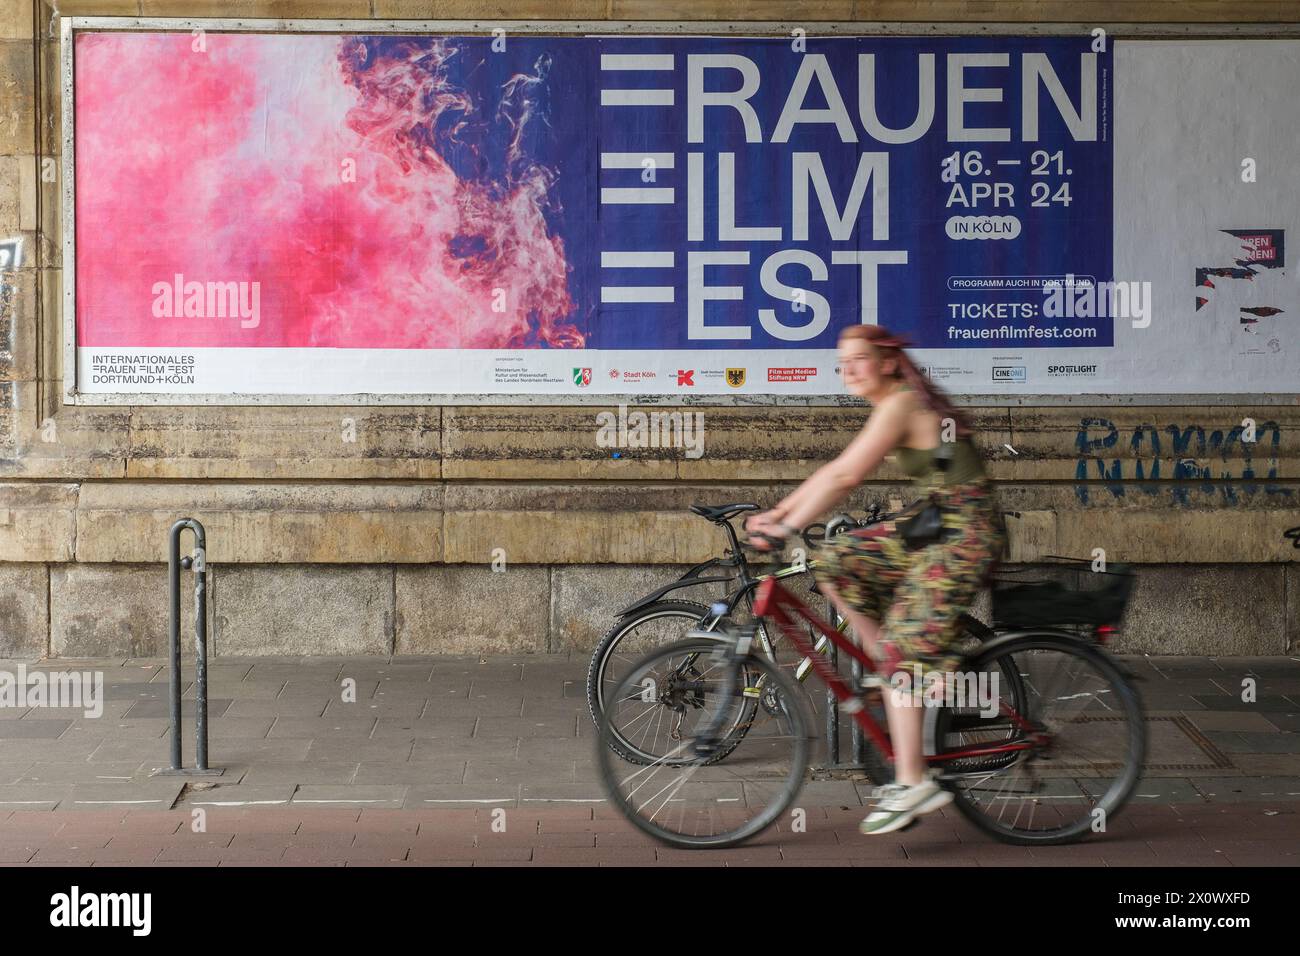 Posters announce the International Women's Film Festival Dortmund + Cologne, which is taking place in Cologne this year Stock Photo